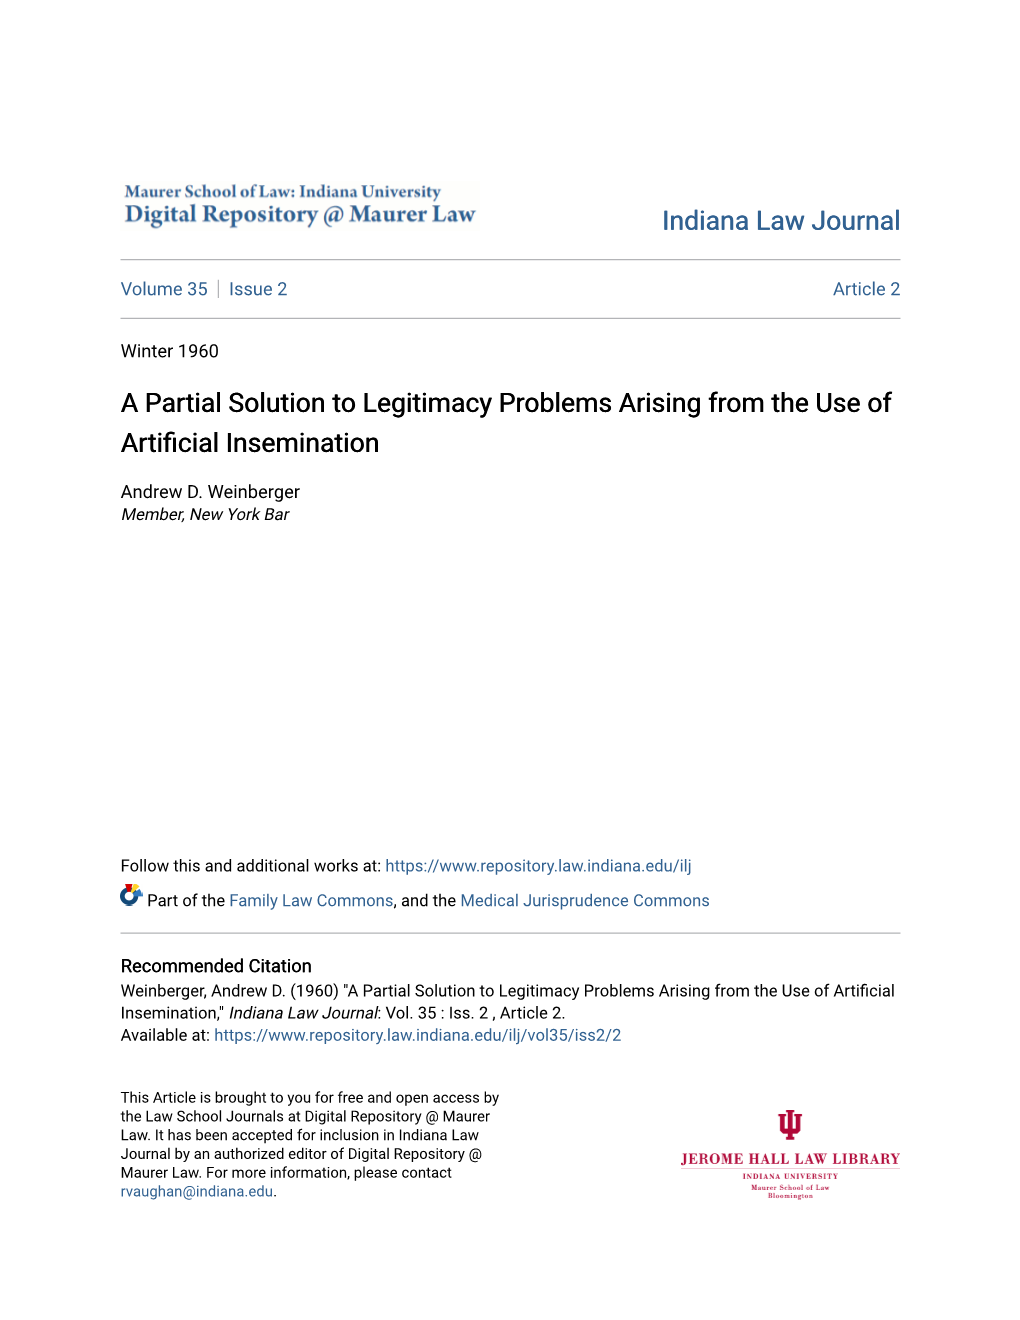 A Partial Solution to Legitimacy Problems Arising from the Use of Artificial Insemination